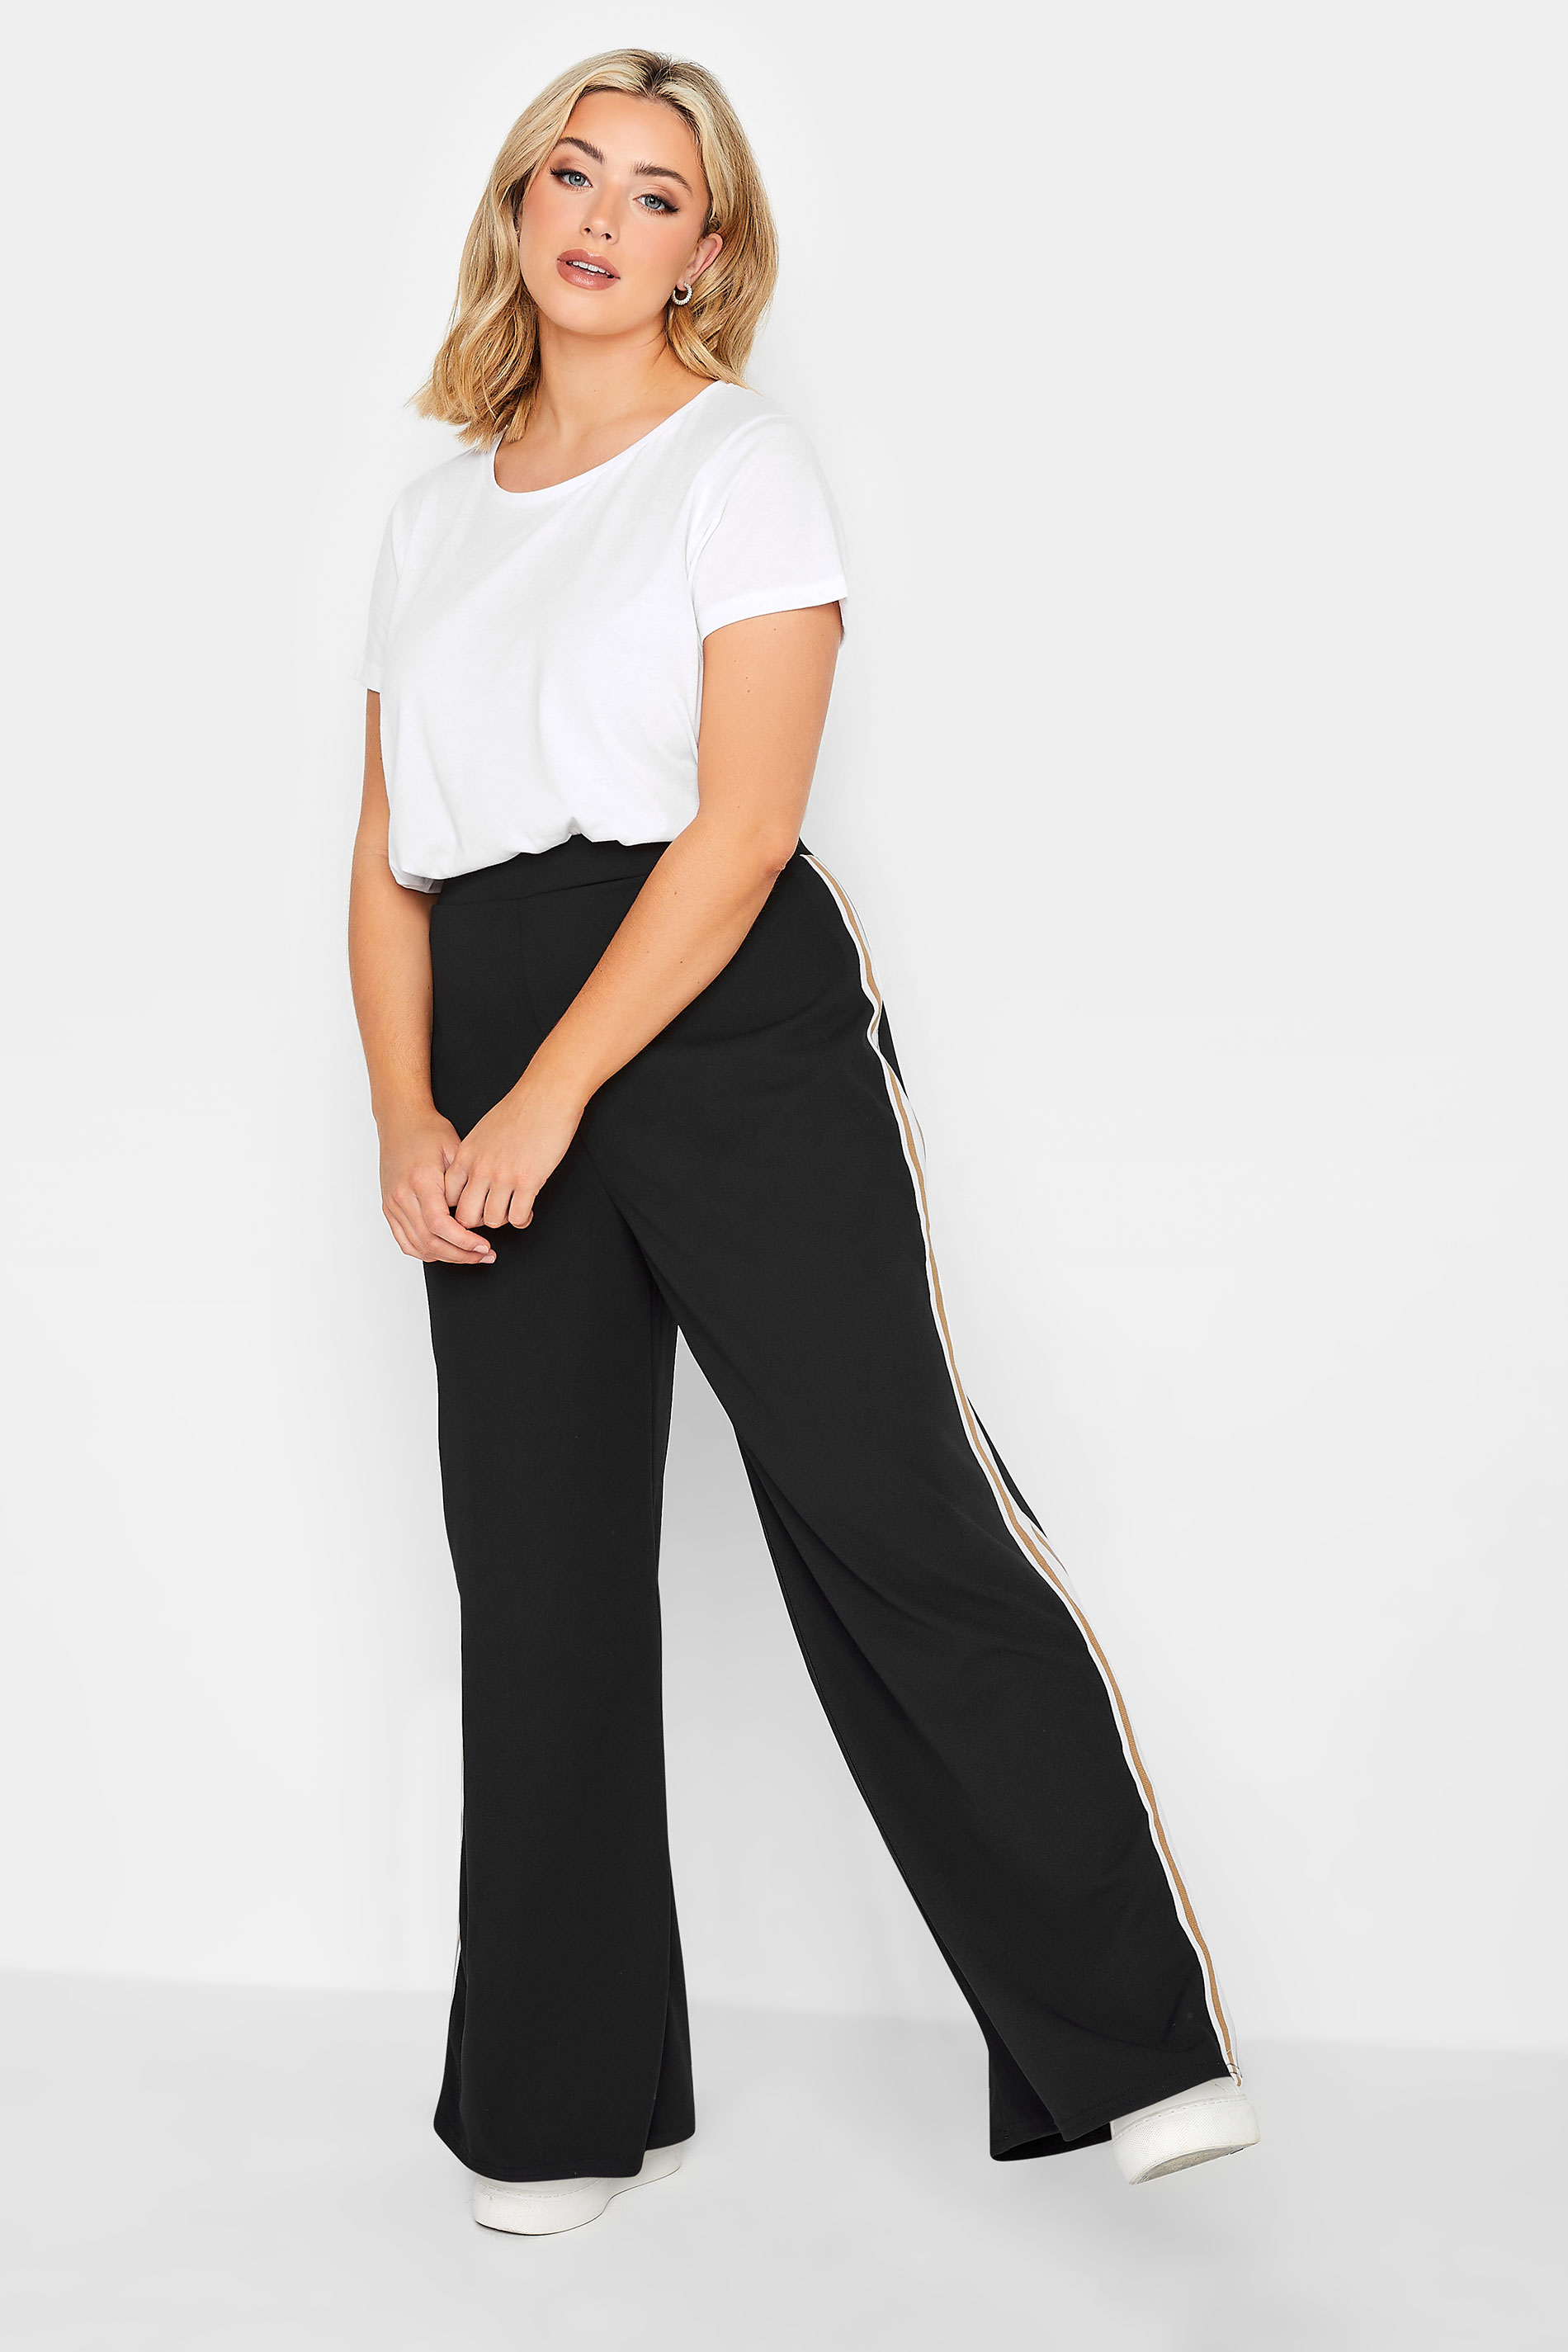 YOURS PETITE Plus Size Black & Brown Block Stripe Wide Leg Trousers | Yours Clothing 2